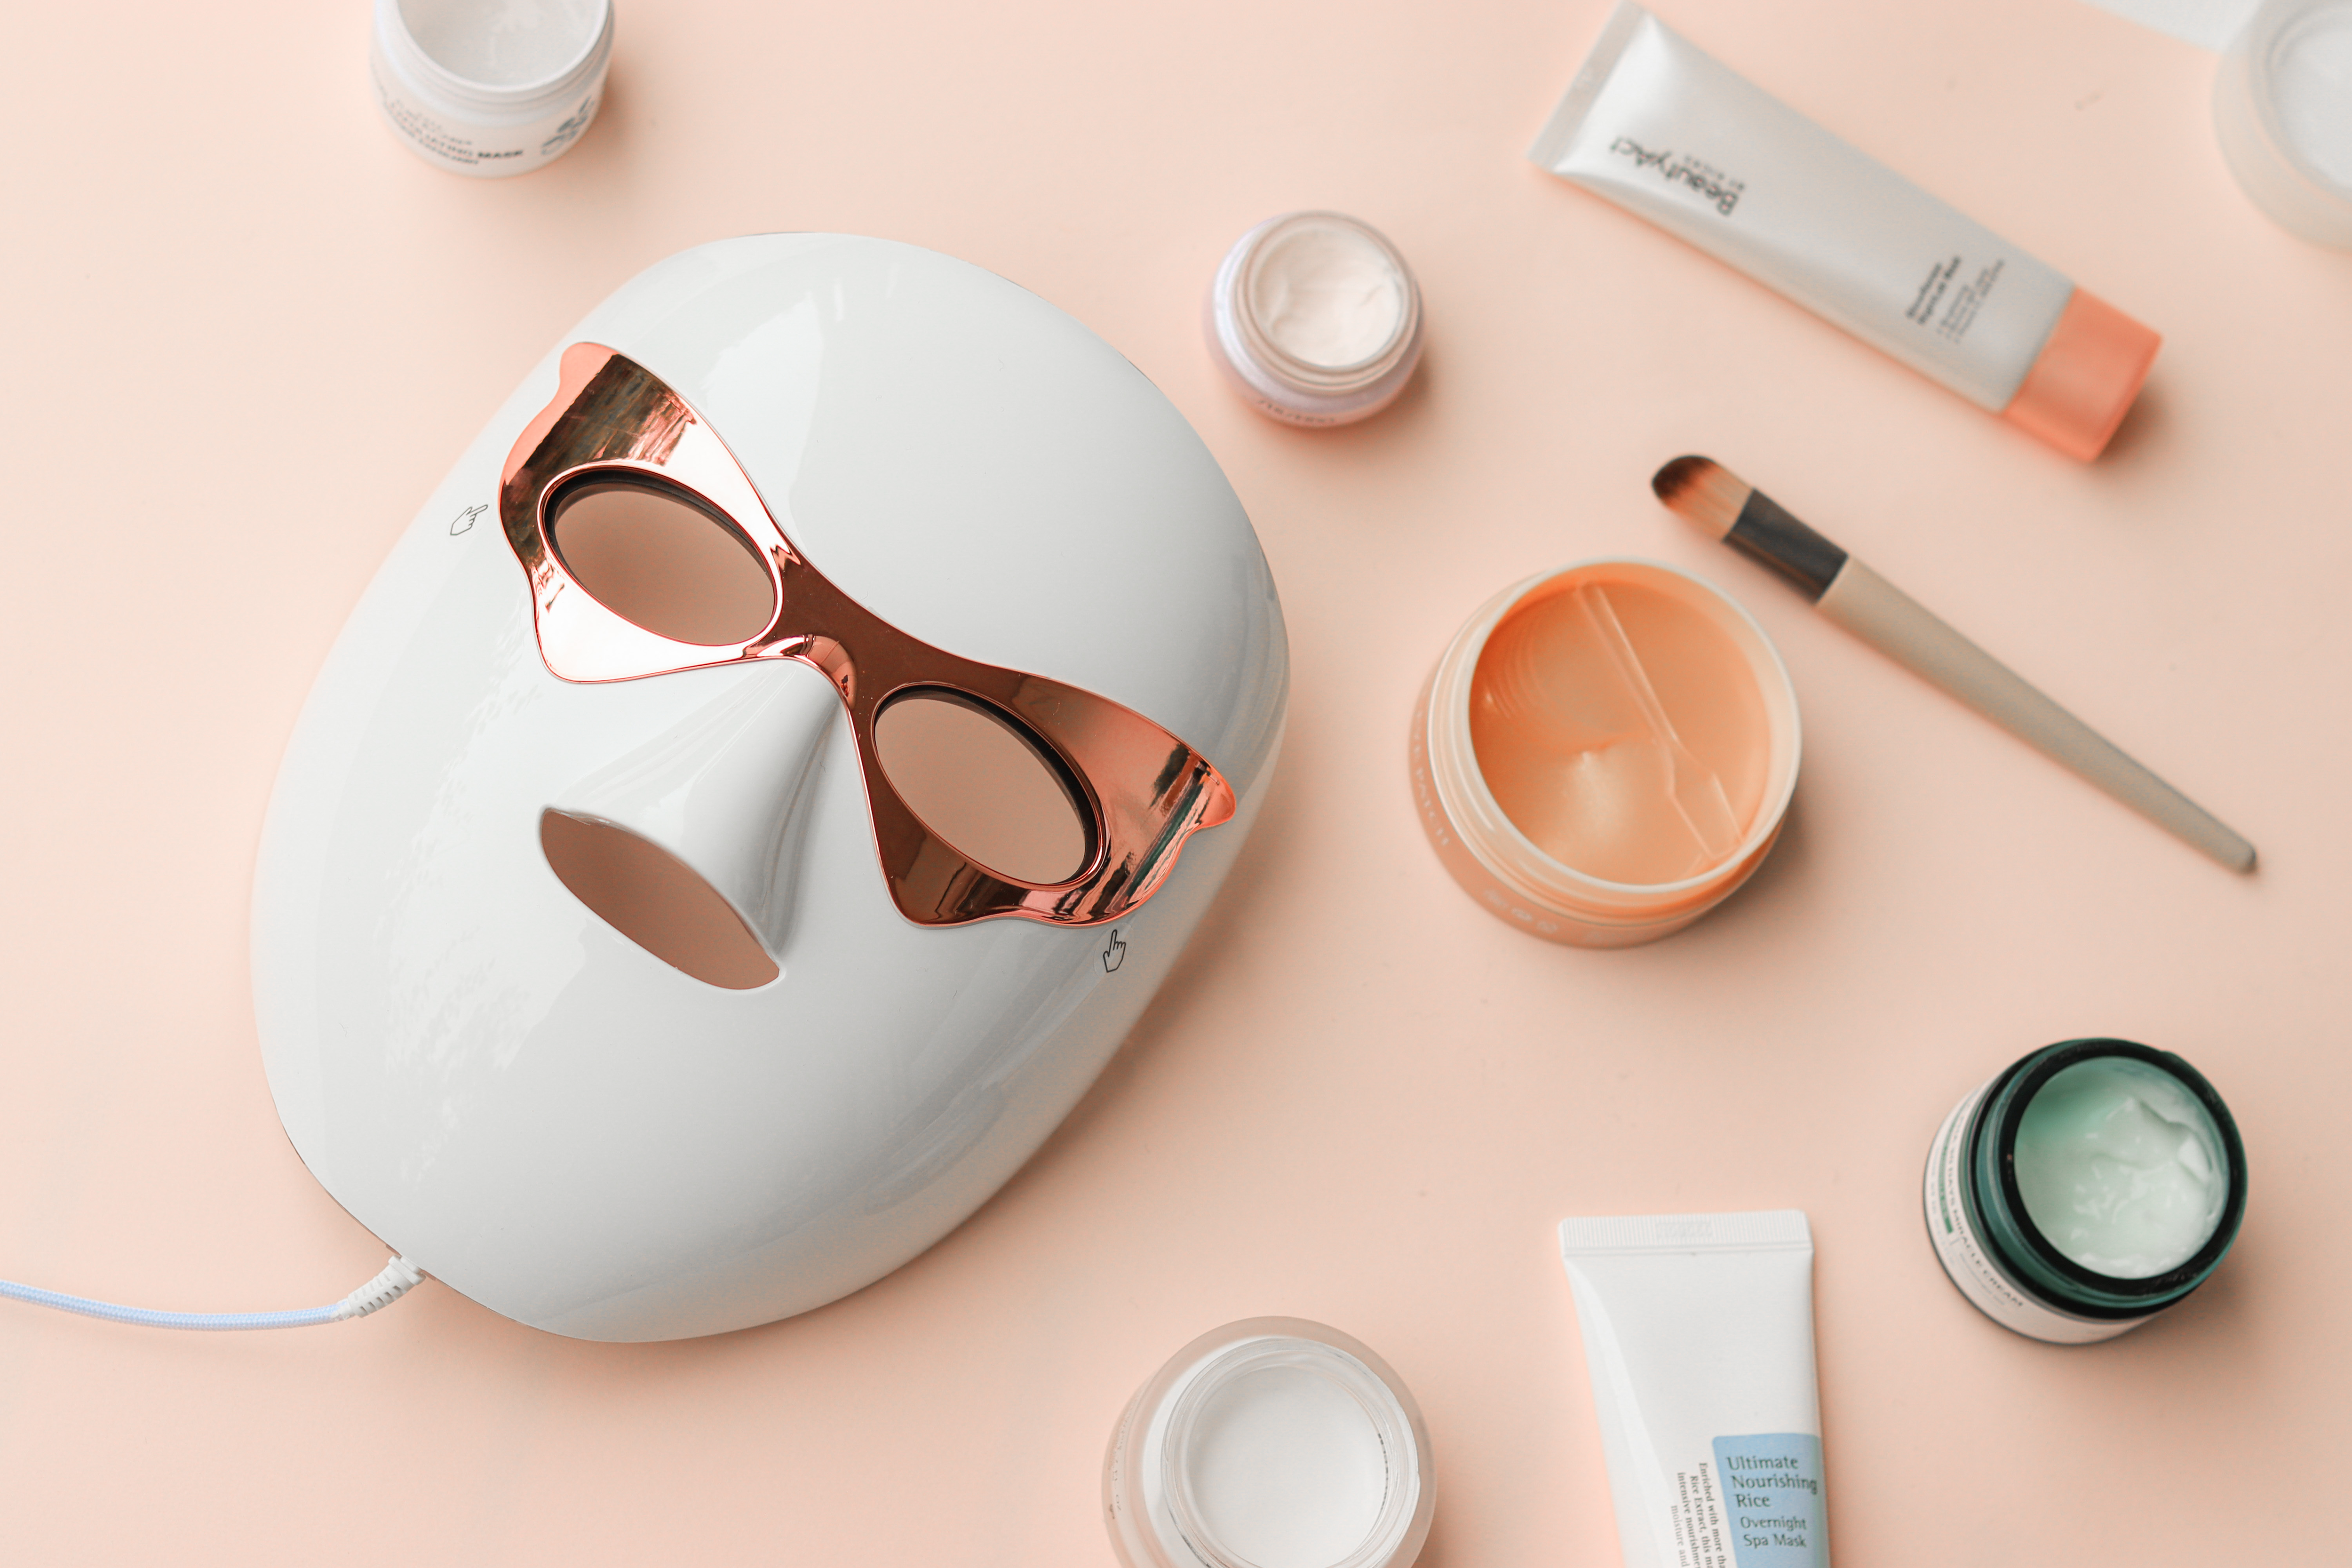 LED mask from Silkemyk among our favorite products in beauty and skin care.